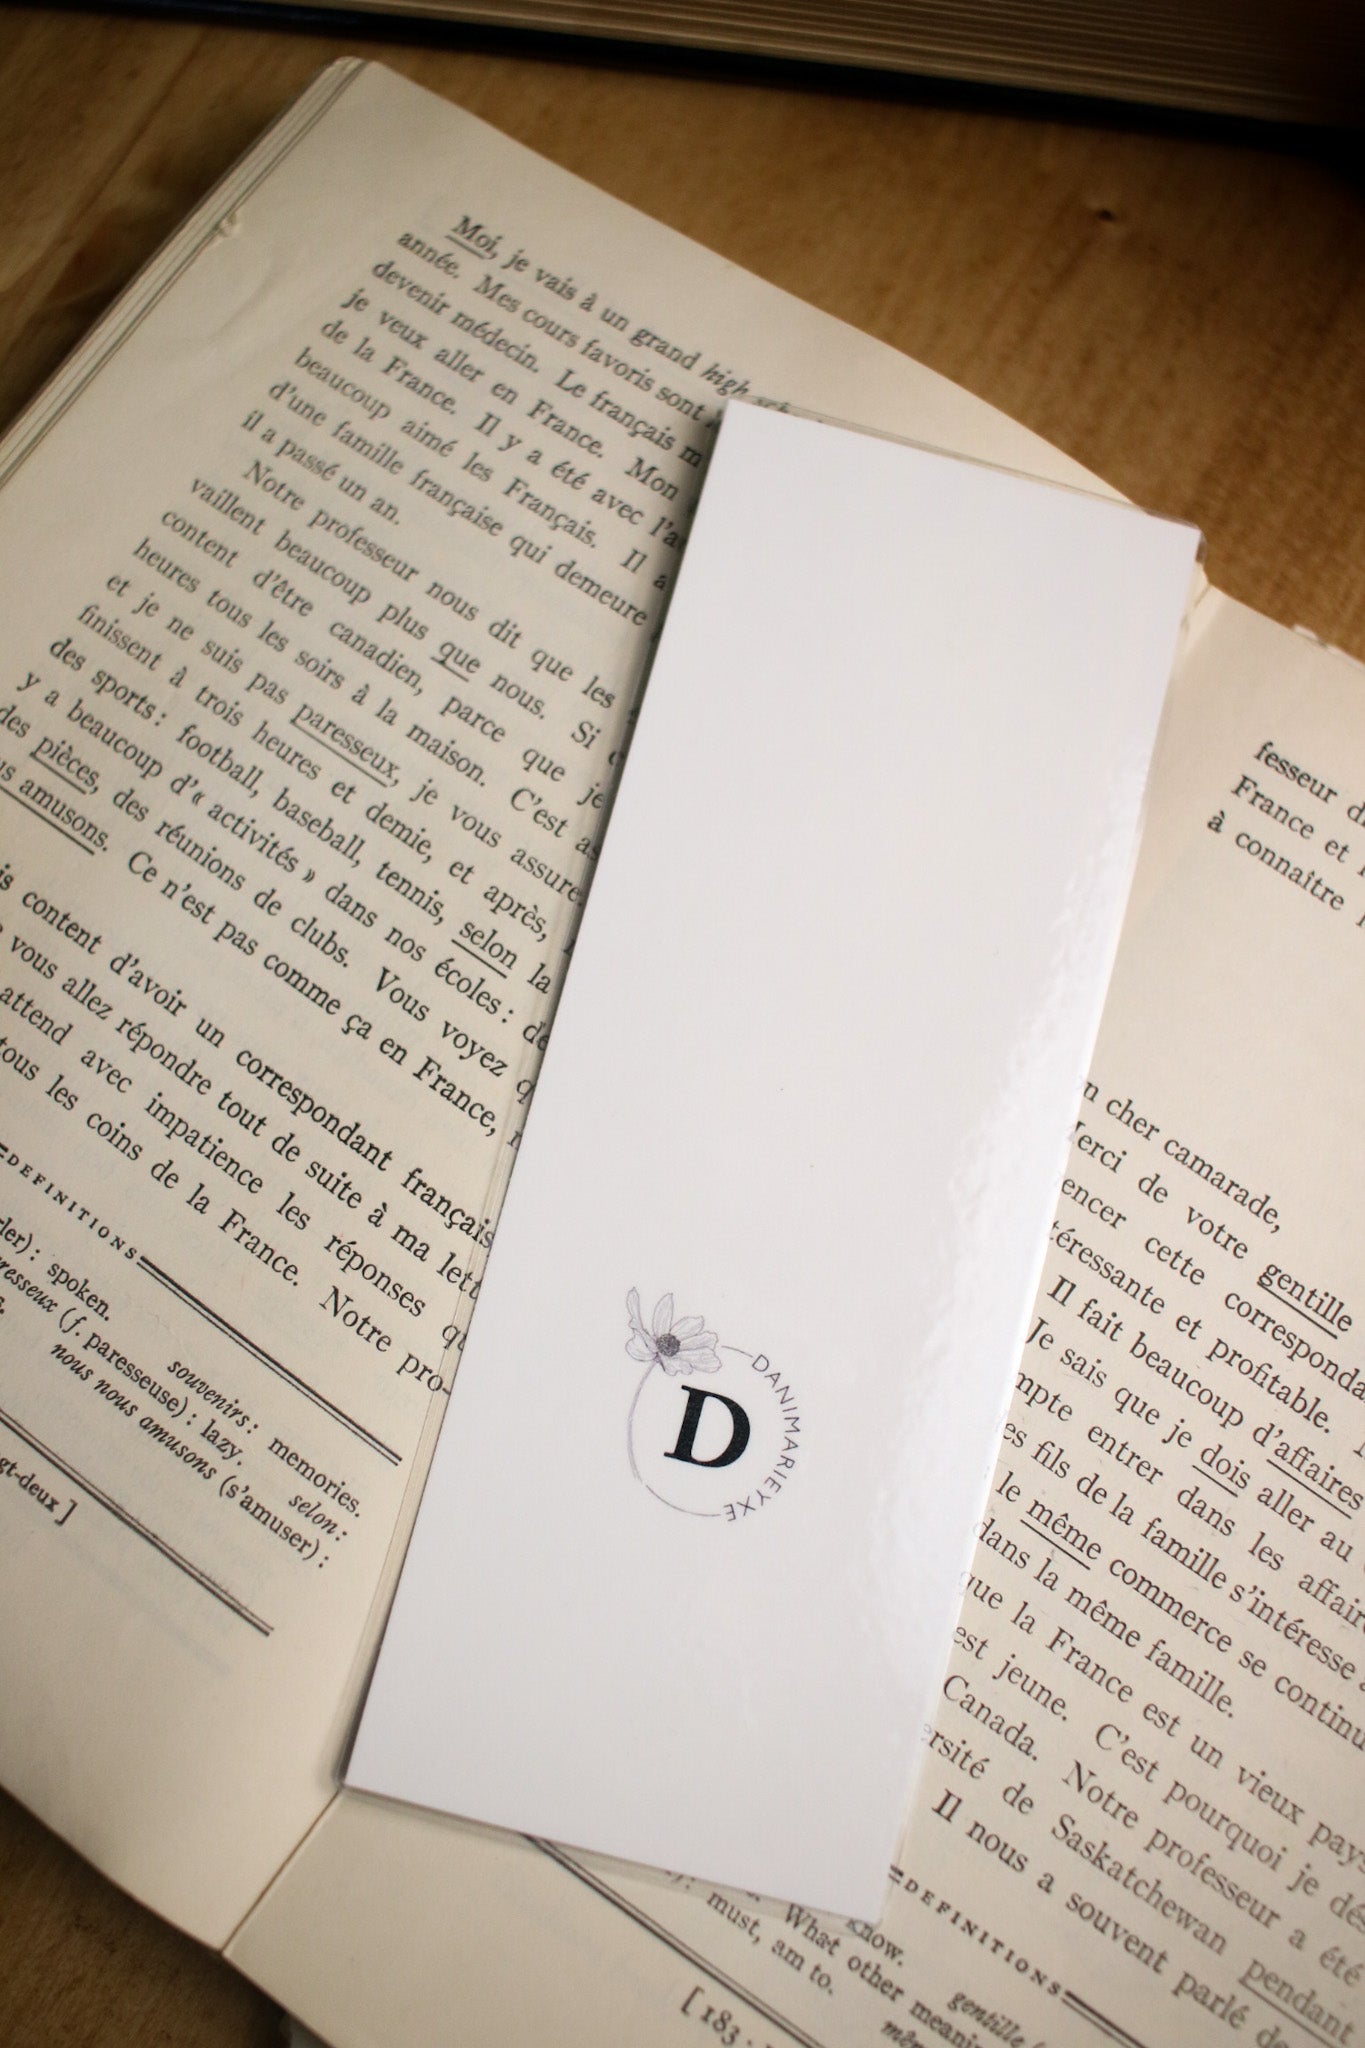 SECONDS - Moon Phase Bookmark